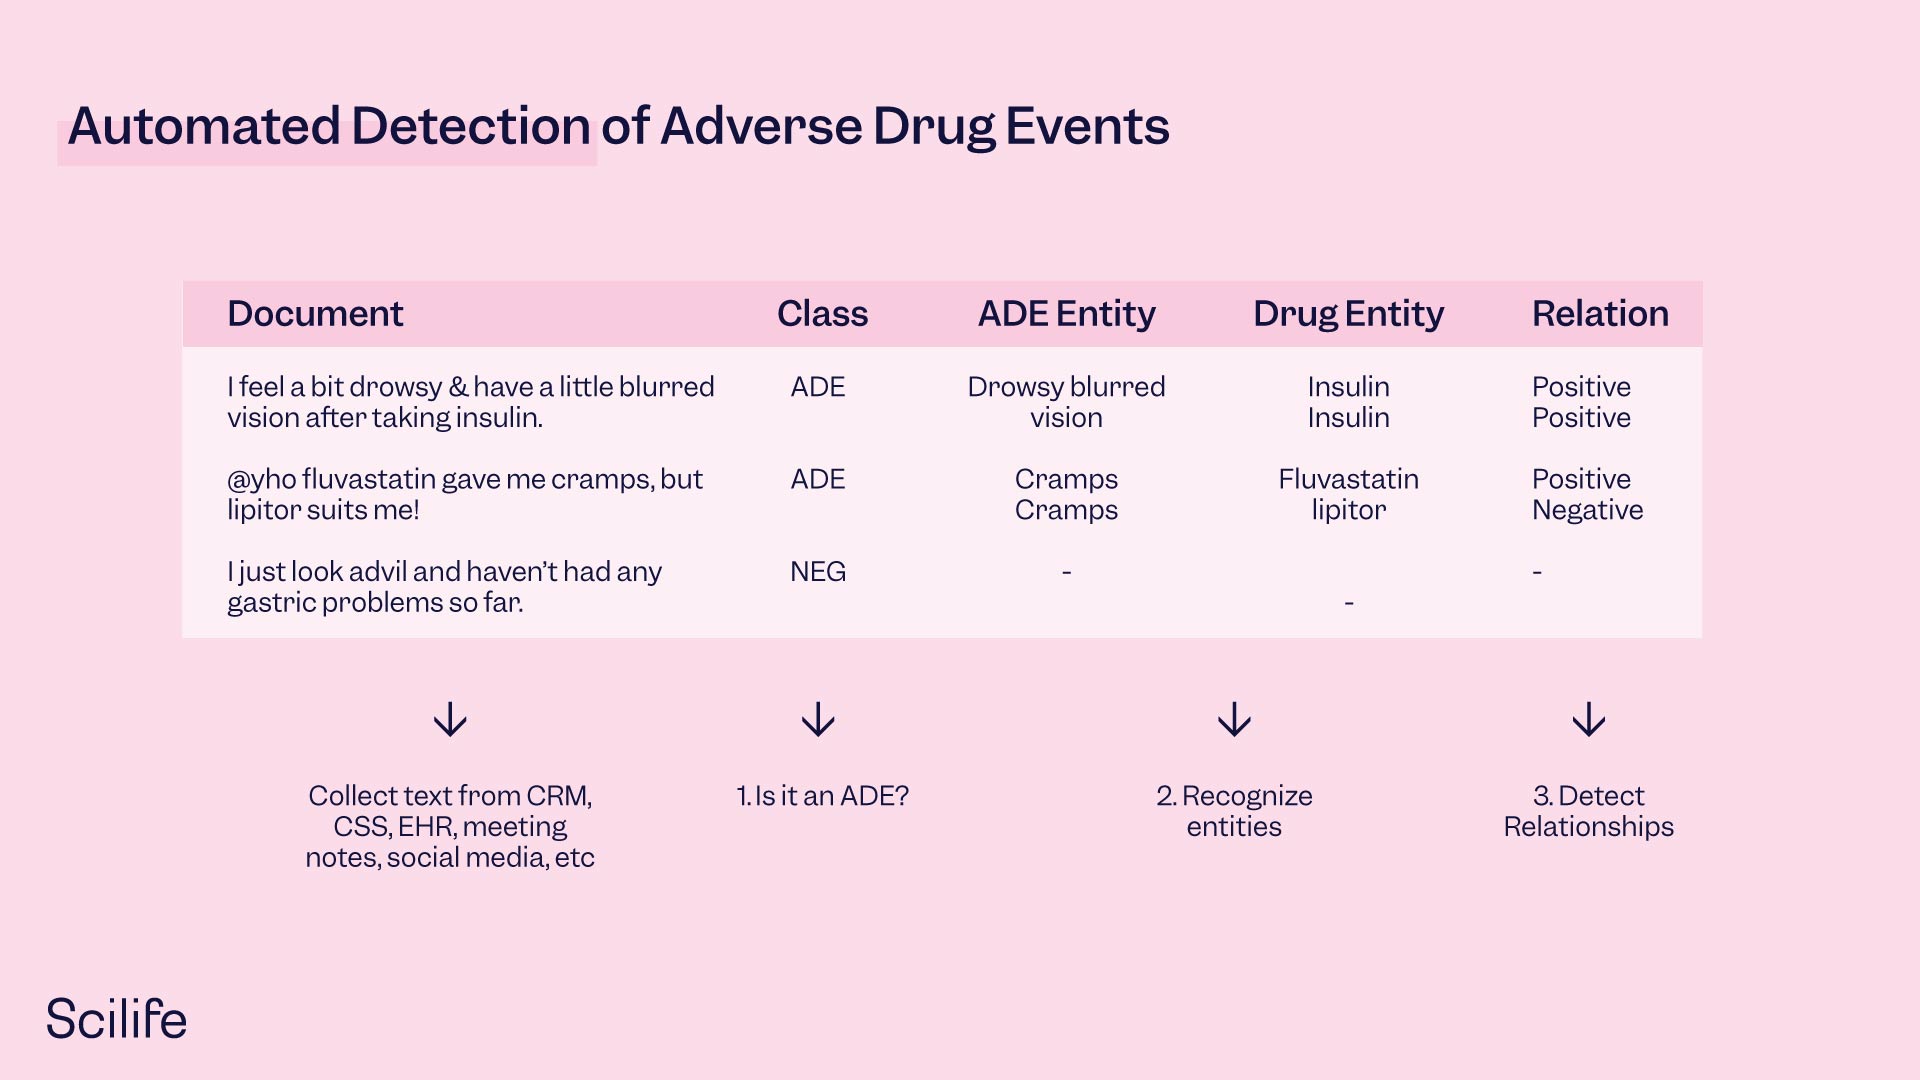 Infographic about Automated Detection of Adverse Drug Events using Natural Language Processing methodology | Scilife